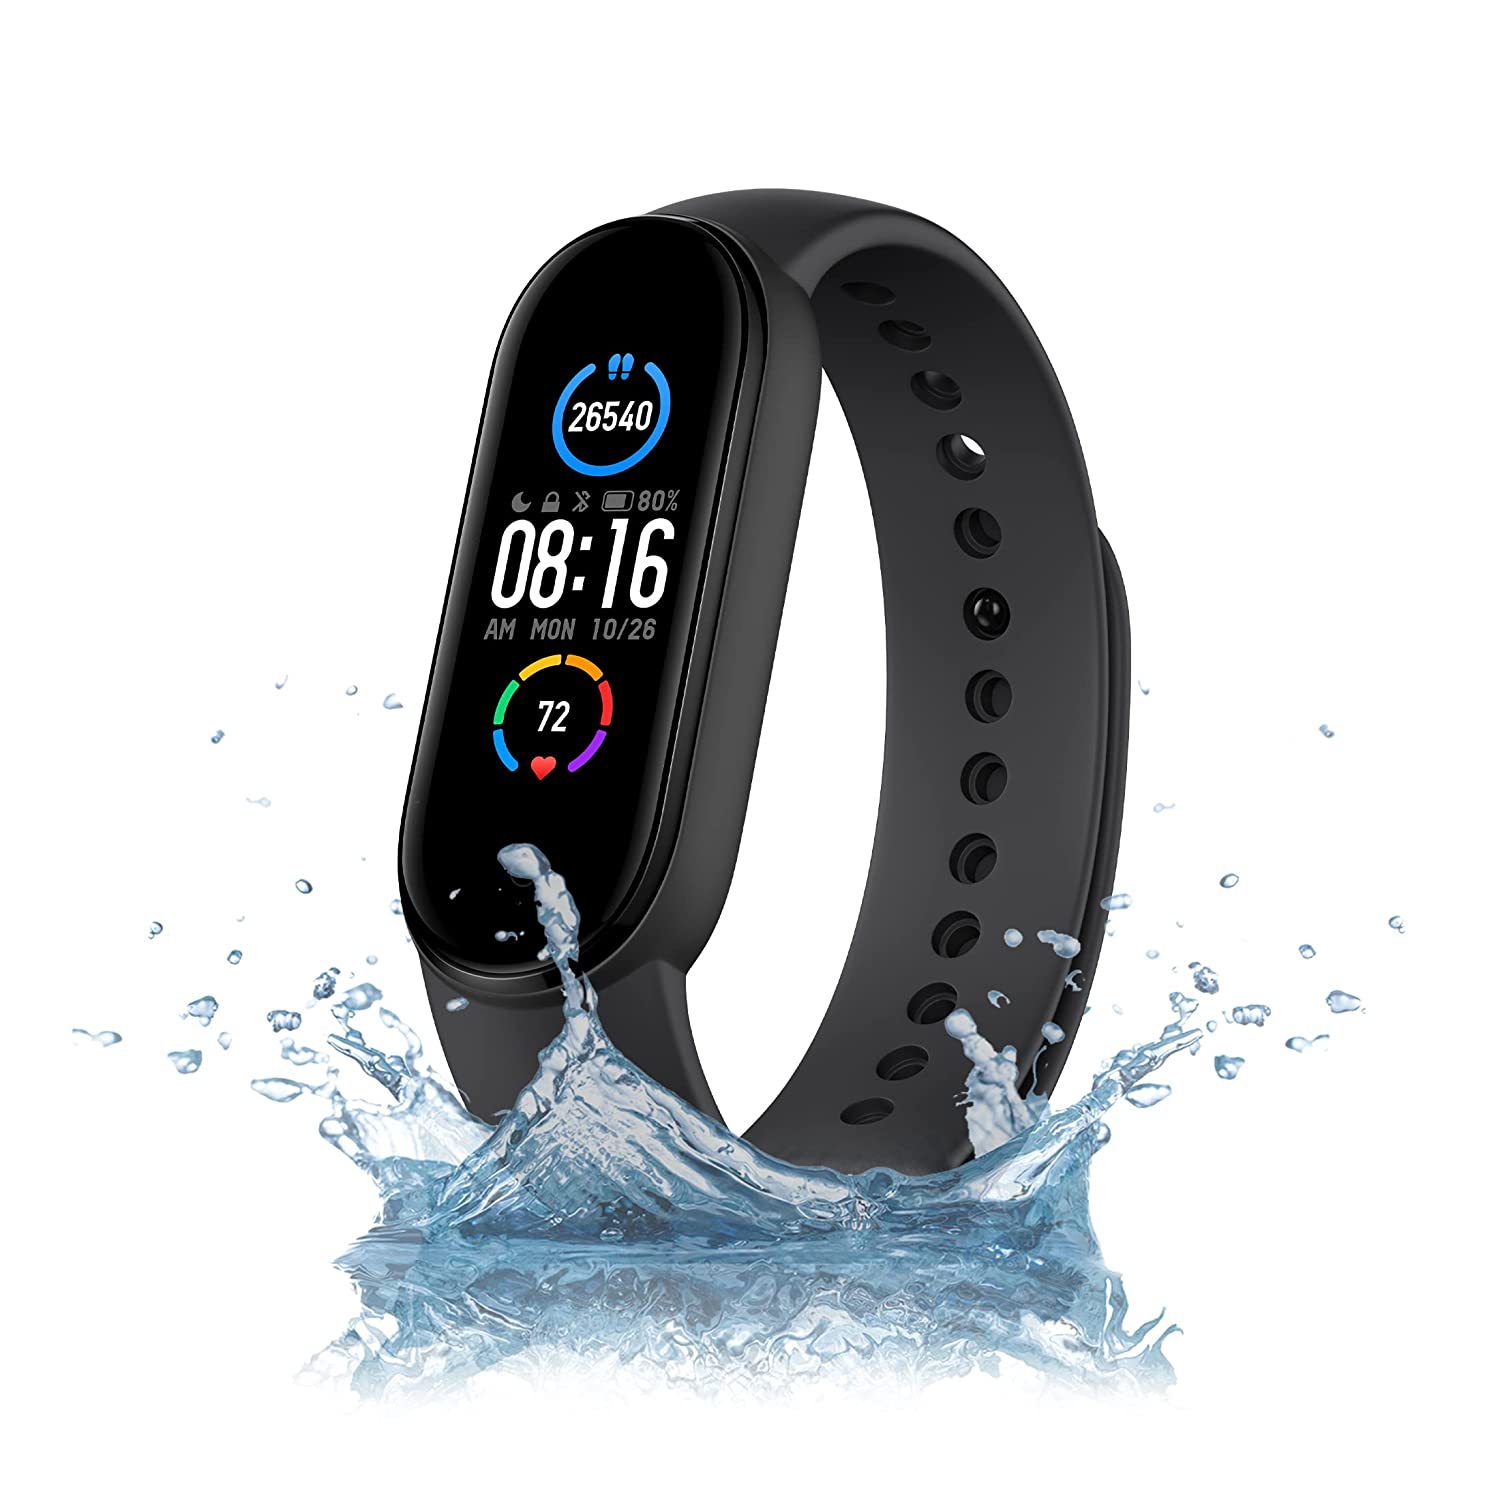 Mi Smart Band 5 – India’s No. 1 Fitness Band, 1.1" (2.8 cm) AMOLED Color Display, Magnetic Charging, 2 Weeks Battery Life, Personal Activity Intelligence (PAI)